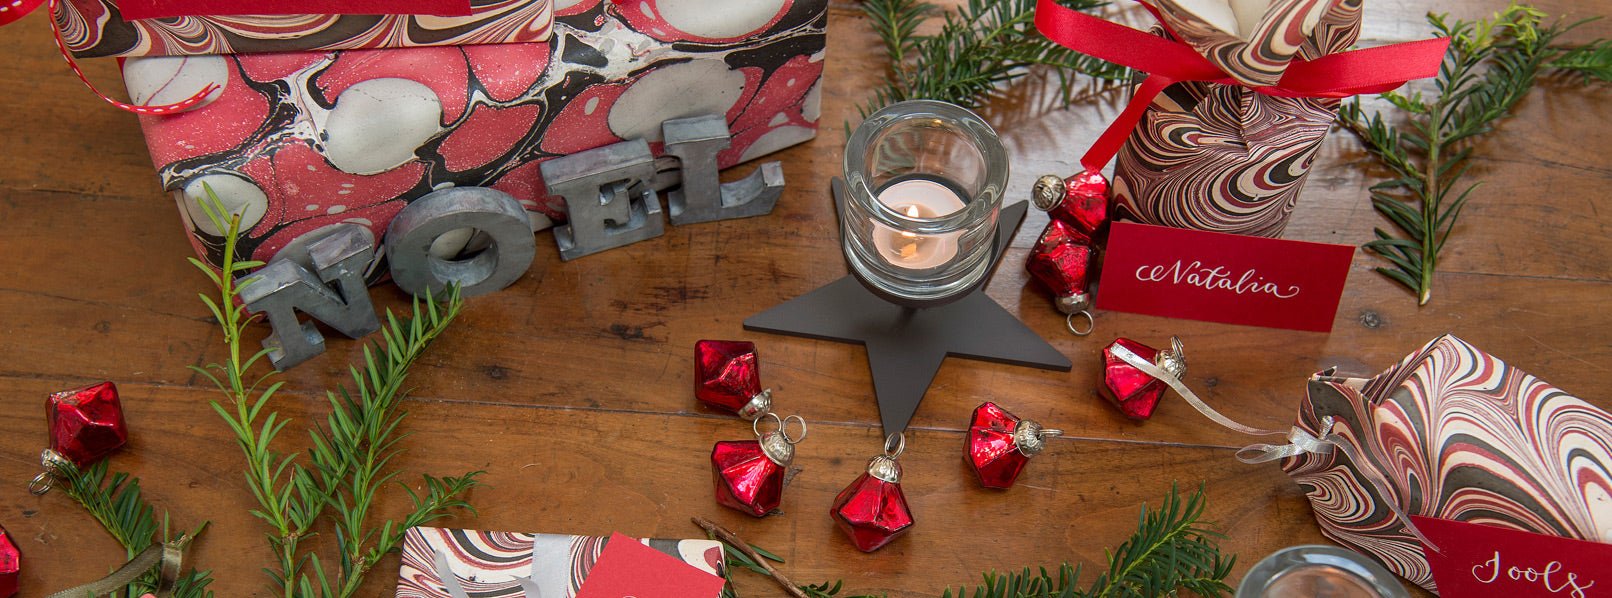 Wrapping consciously this Christmas- 5 tips to go greener. - Natalia Willmott